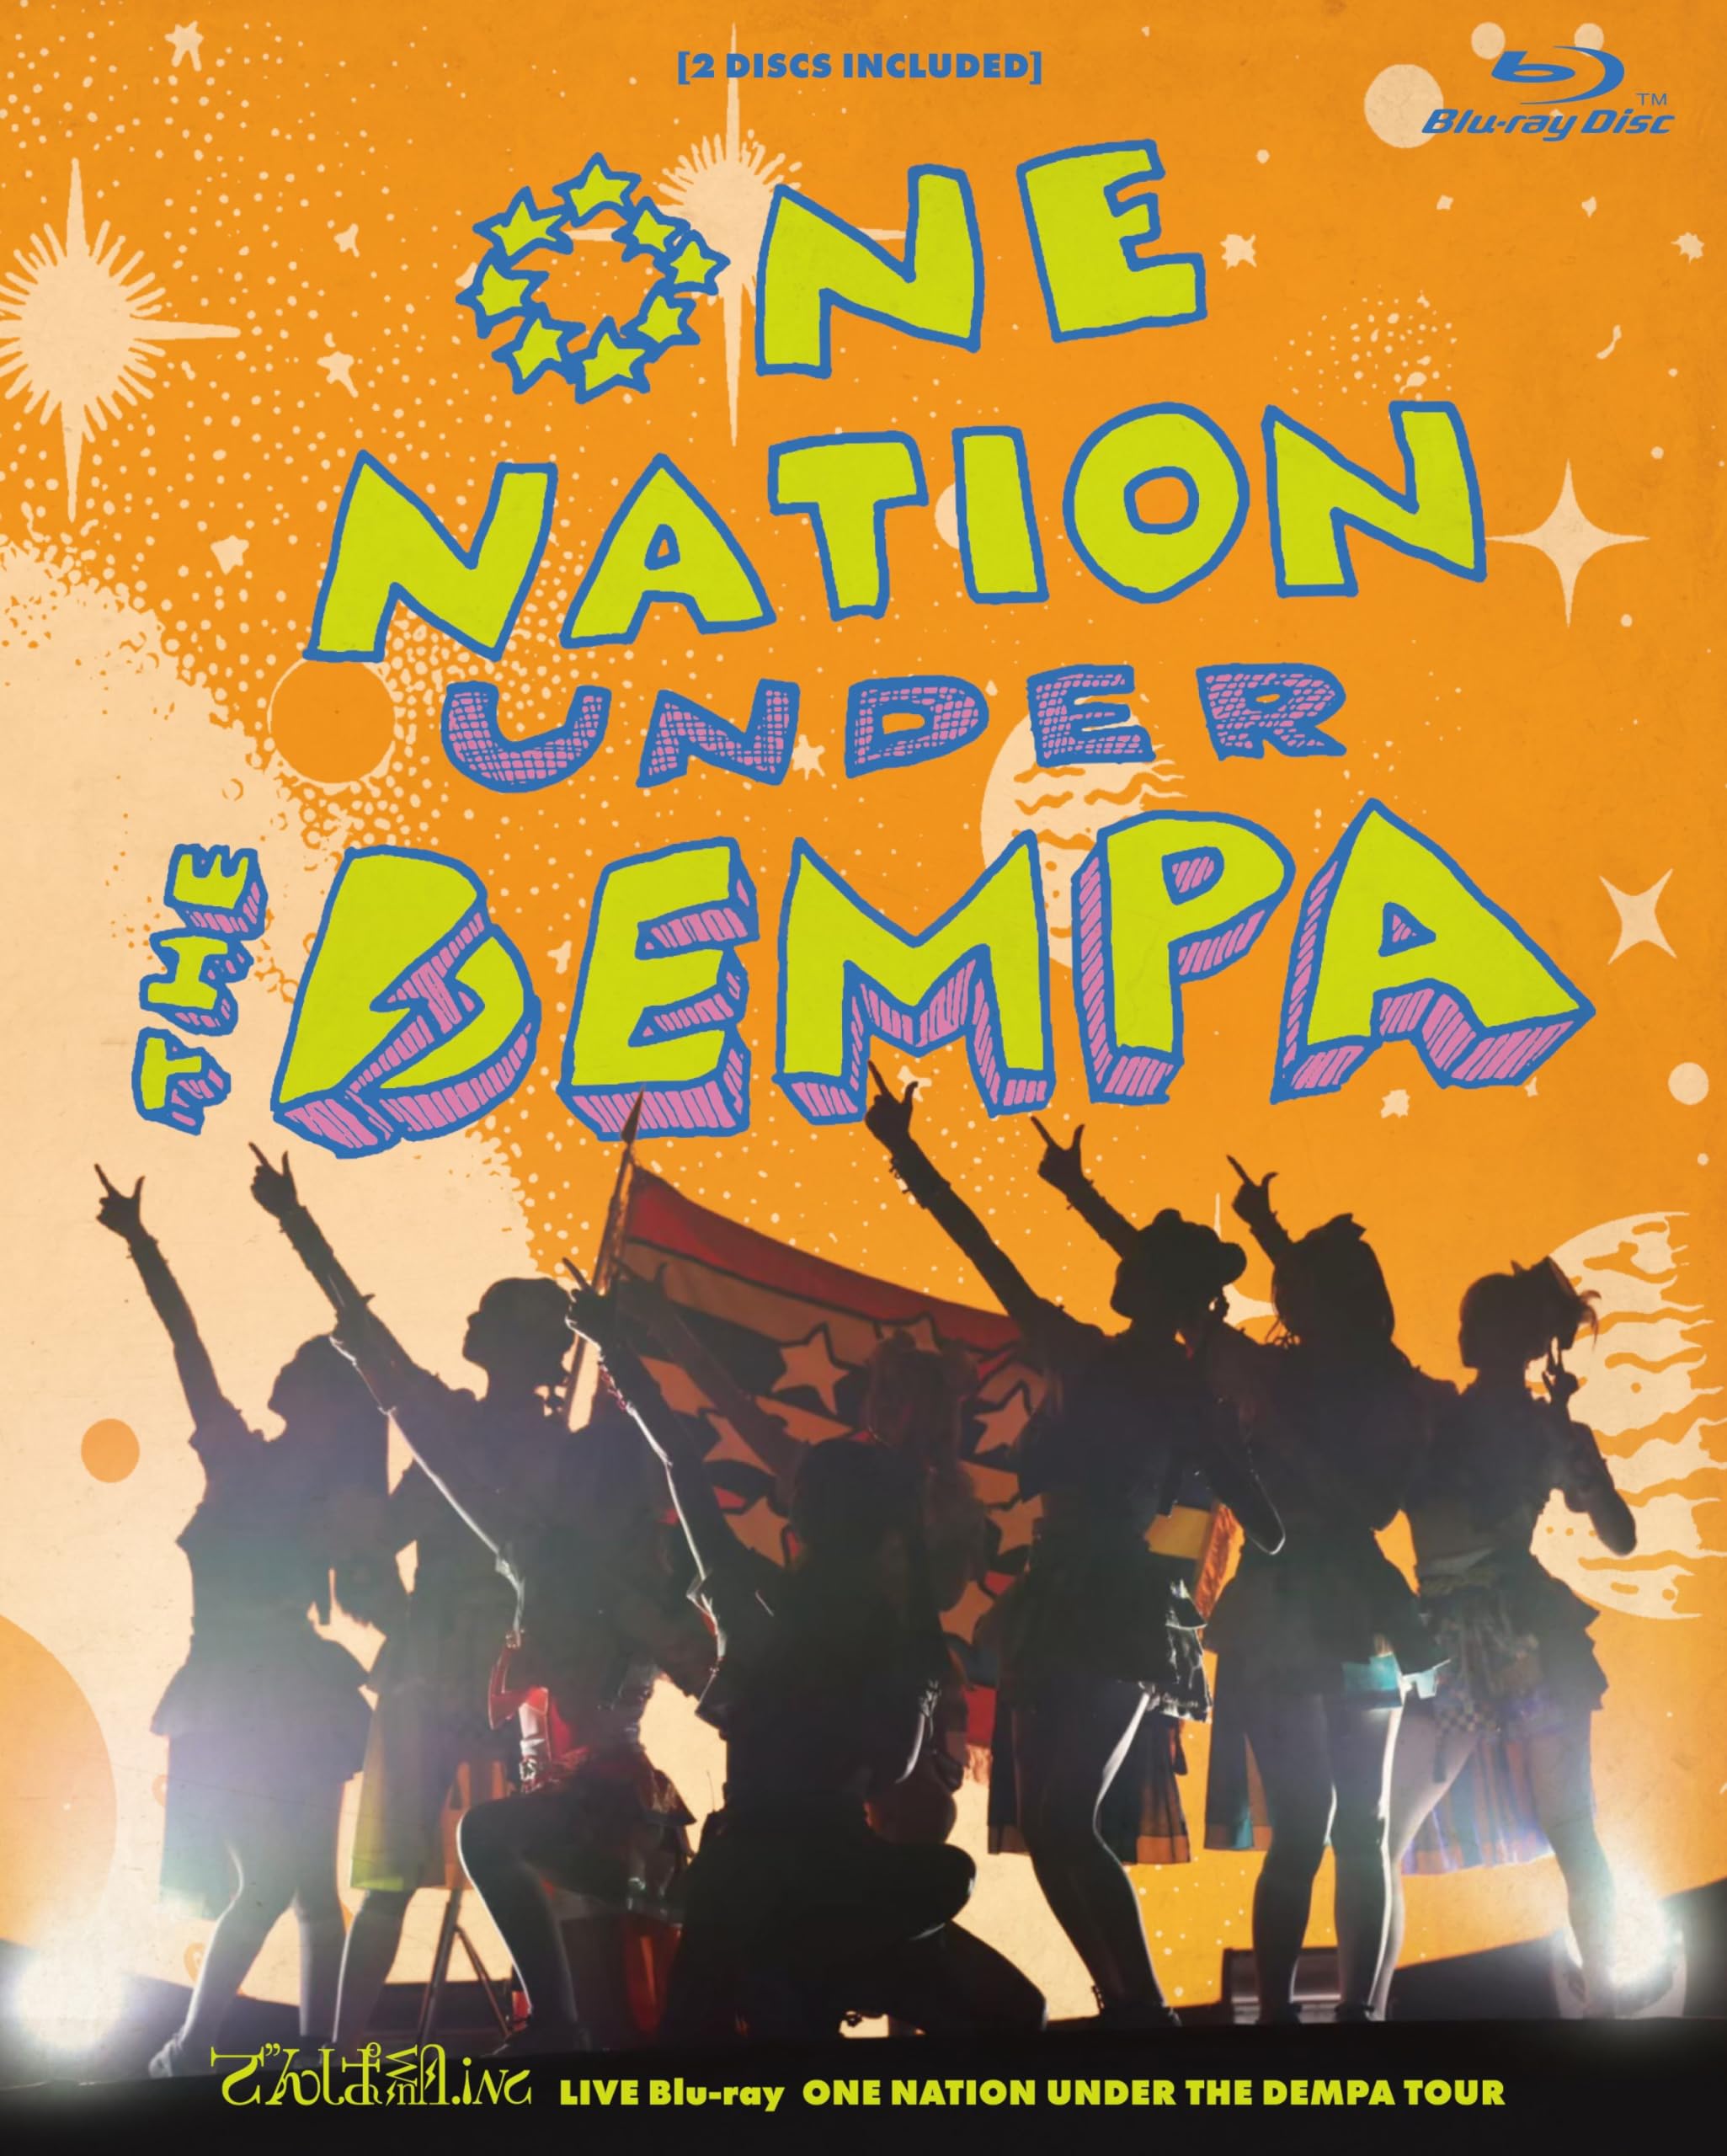 LIVE Blu-ray 『ONE NATION UNDER THE DEMPA TOUR』 (完全生産限定盤) (Blu-ray) (特典なし)